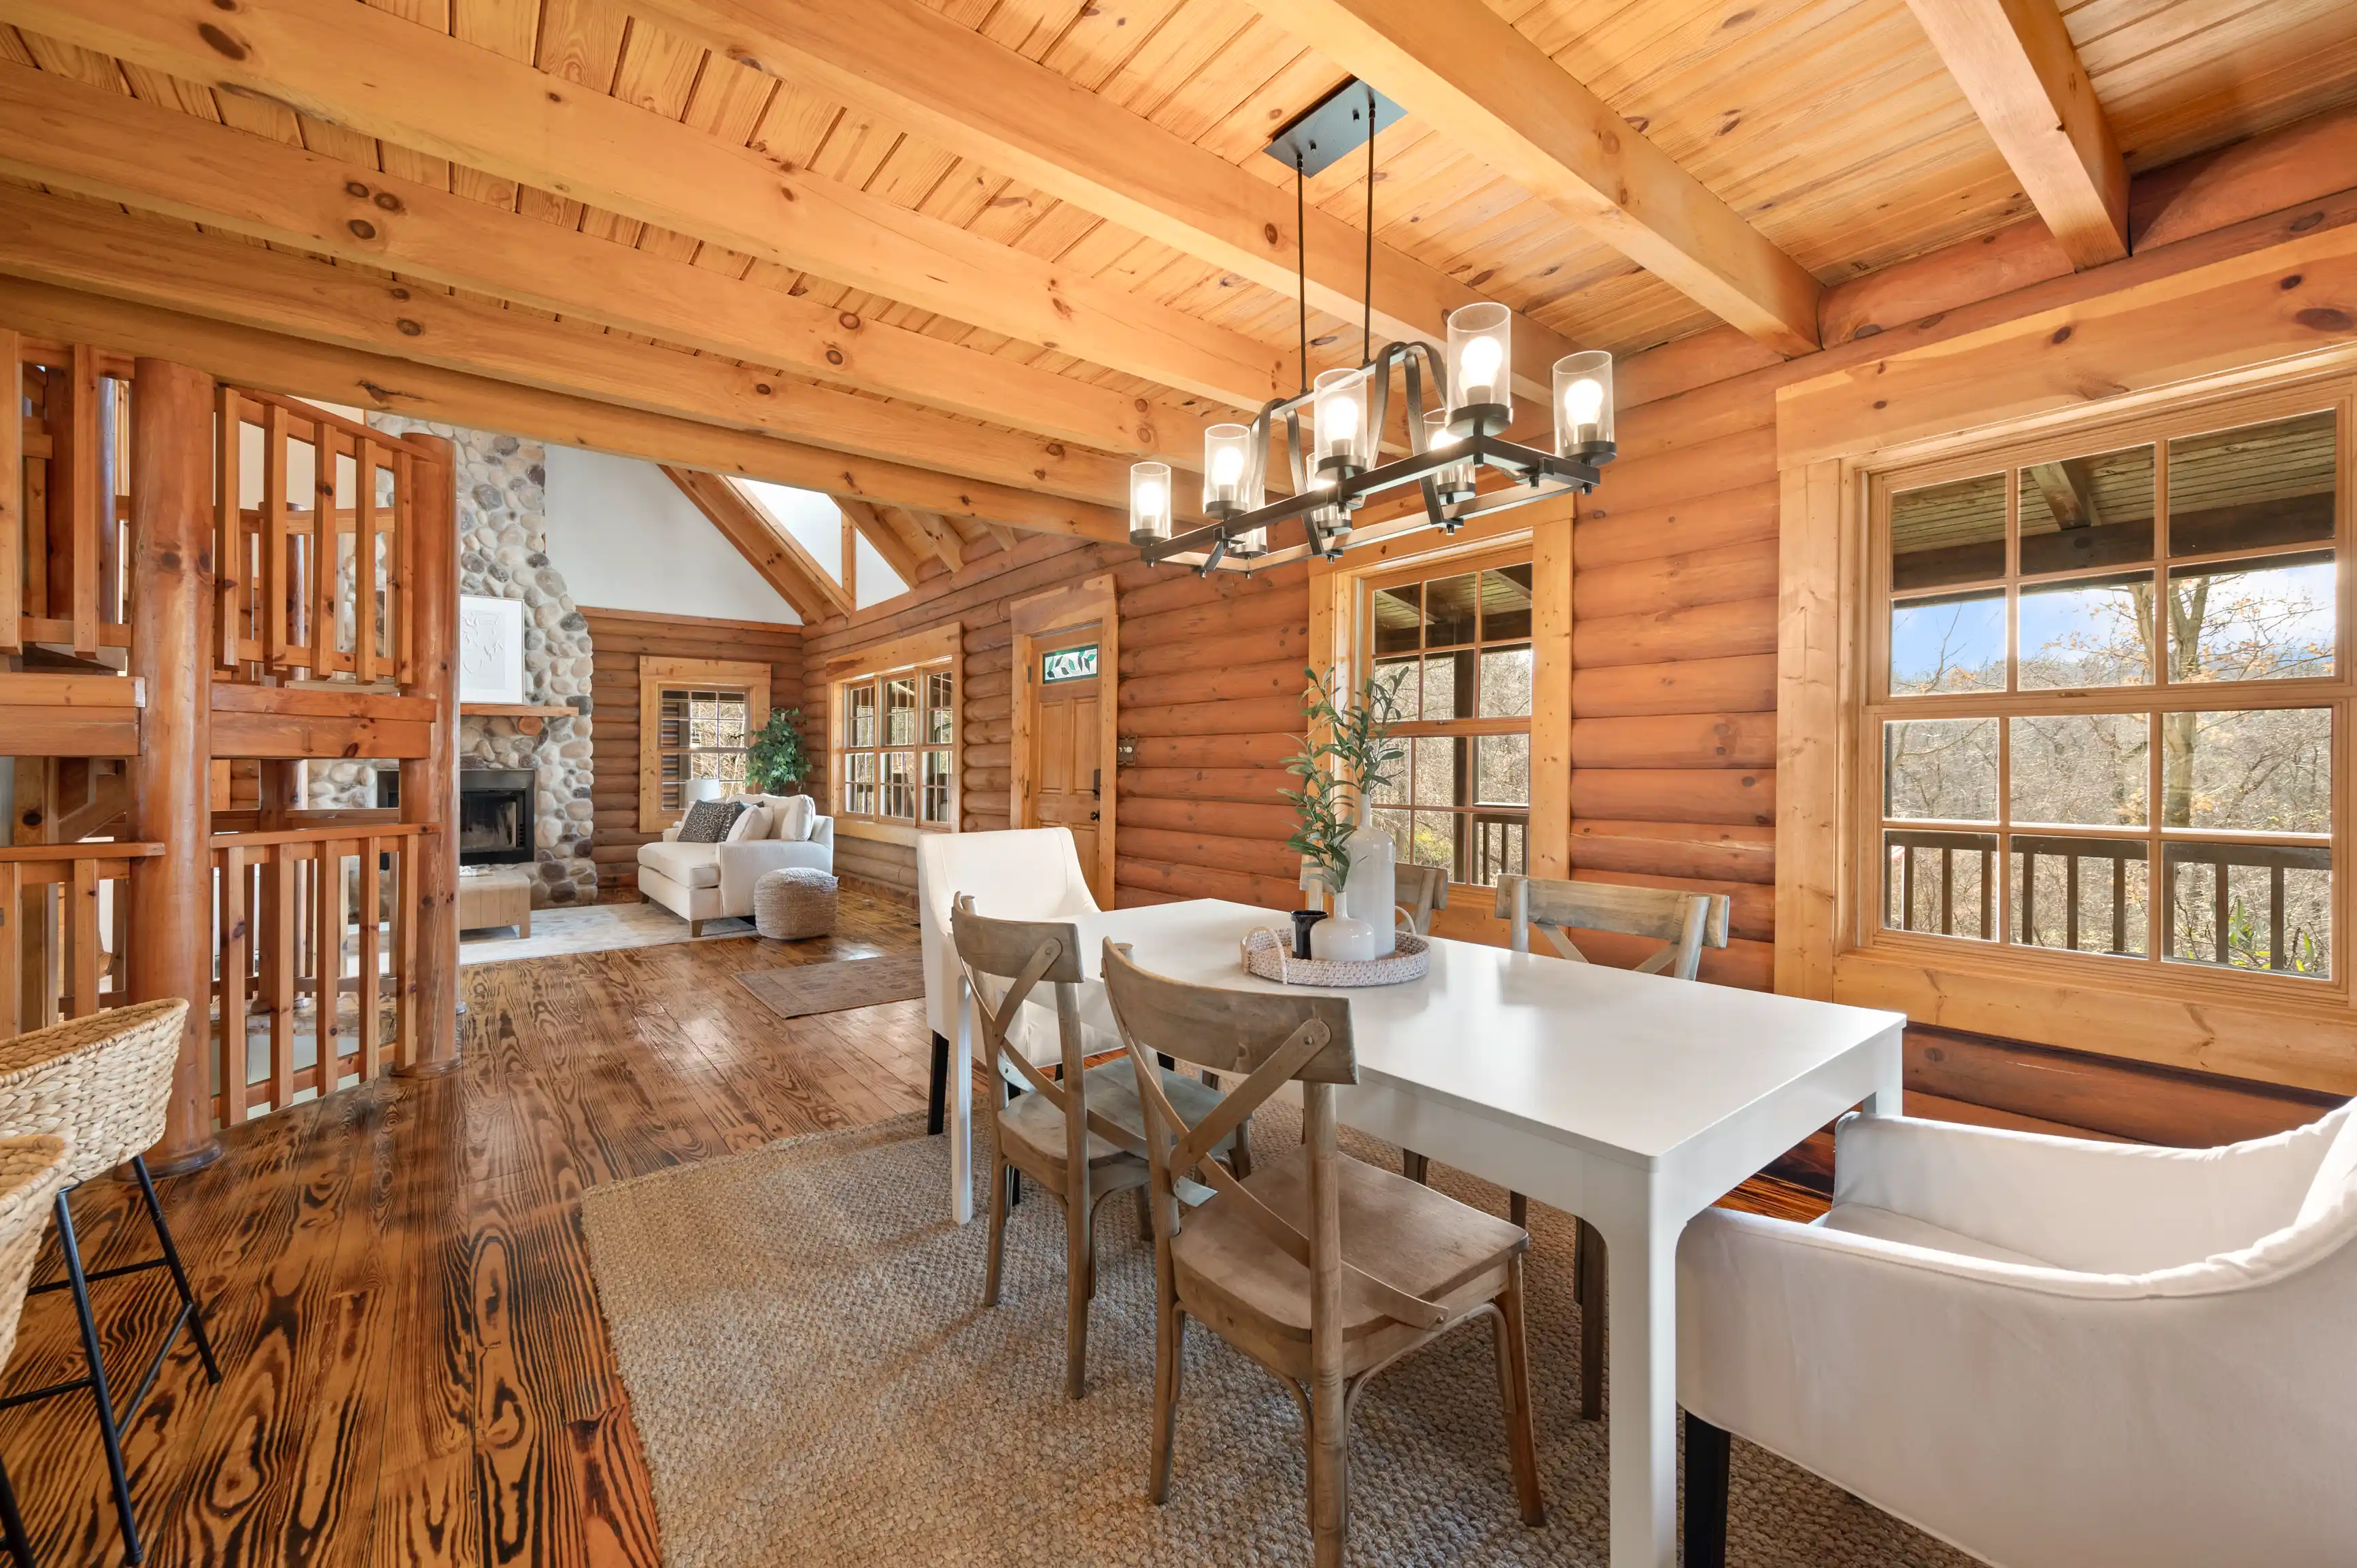 Cozy log cabin interior with exposed wooden beams, a dining area with a white table and chairs, and a living room with a stone fireplace in the background, natural light streaming through large windows.